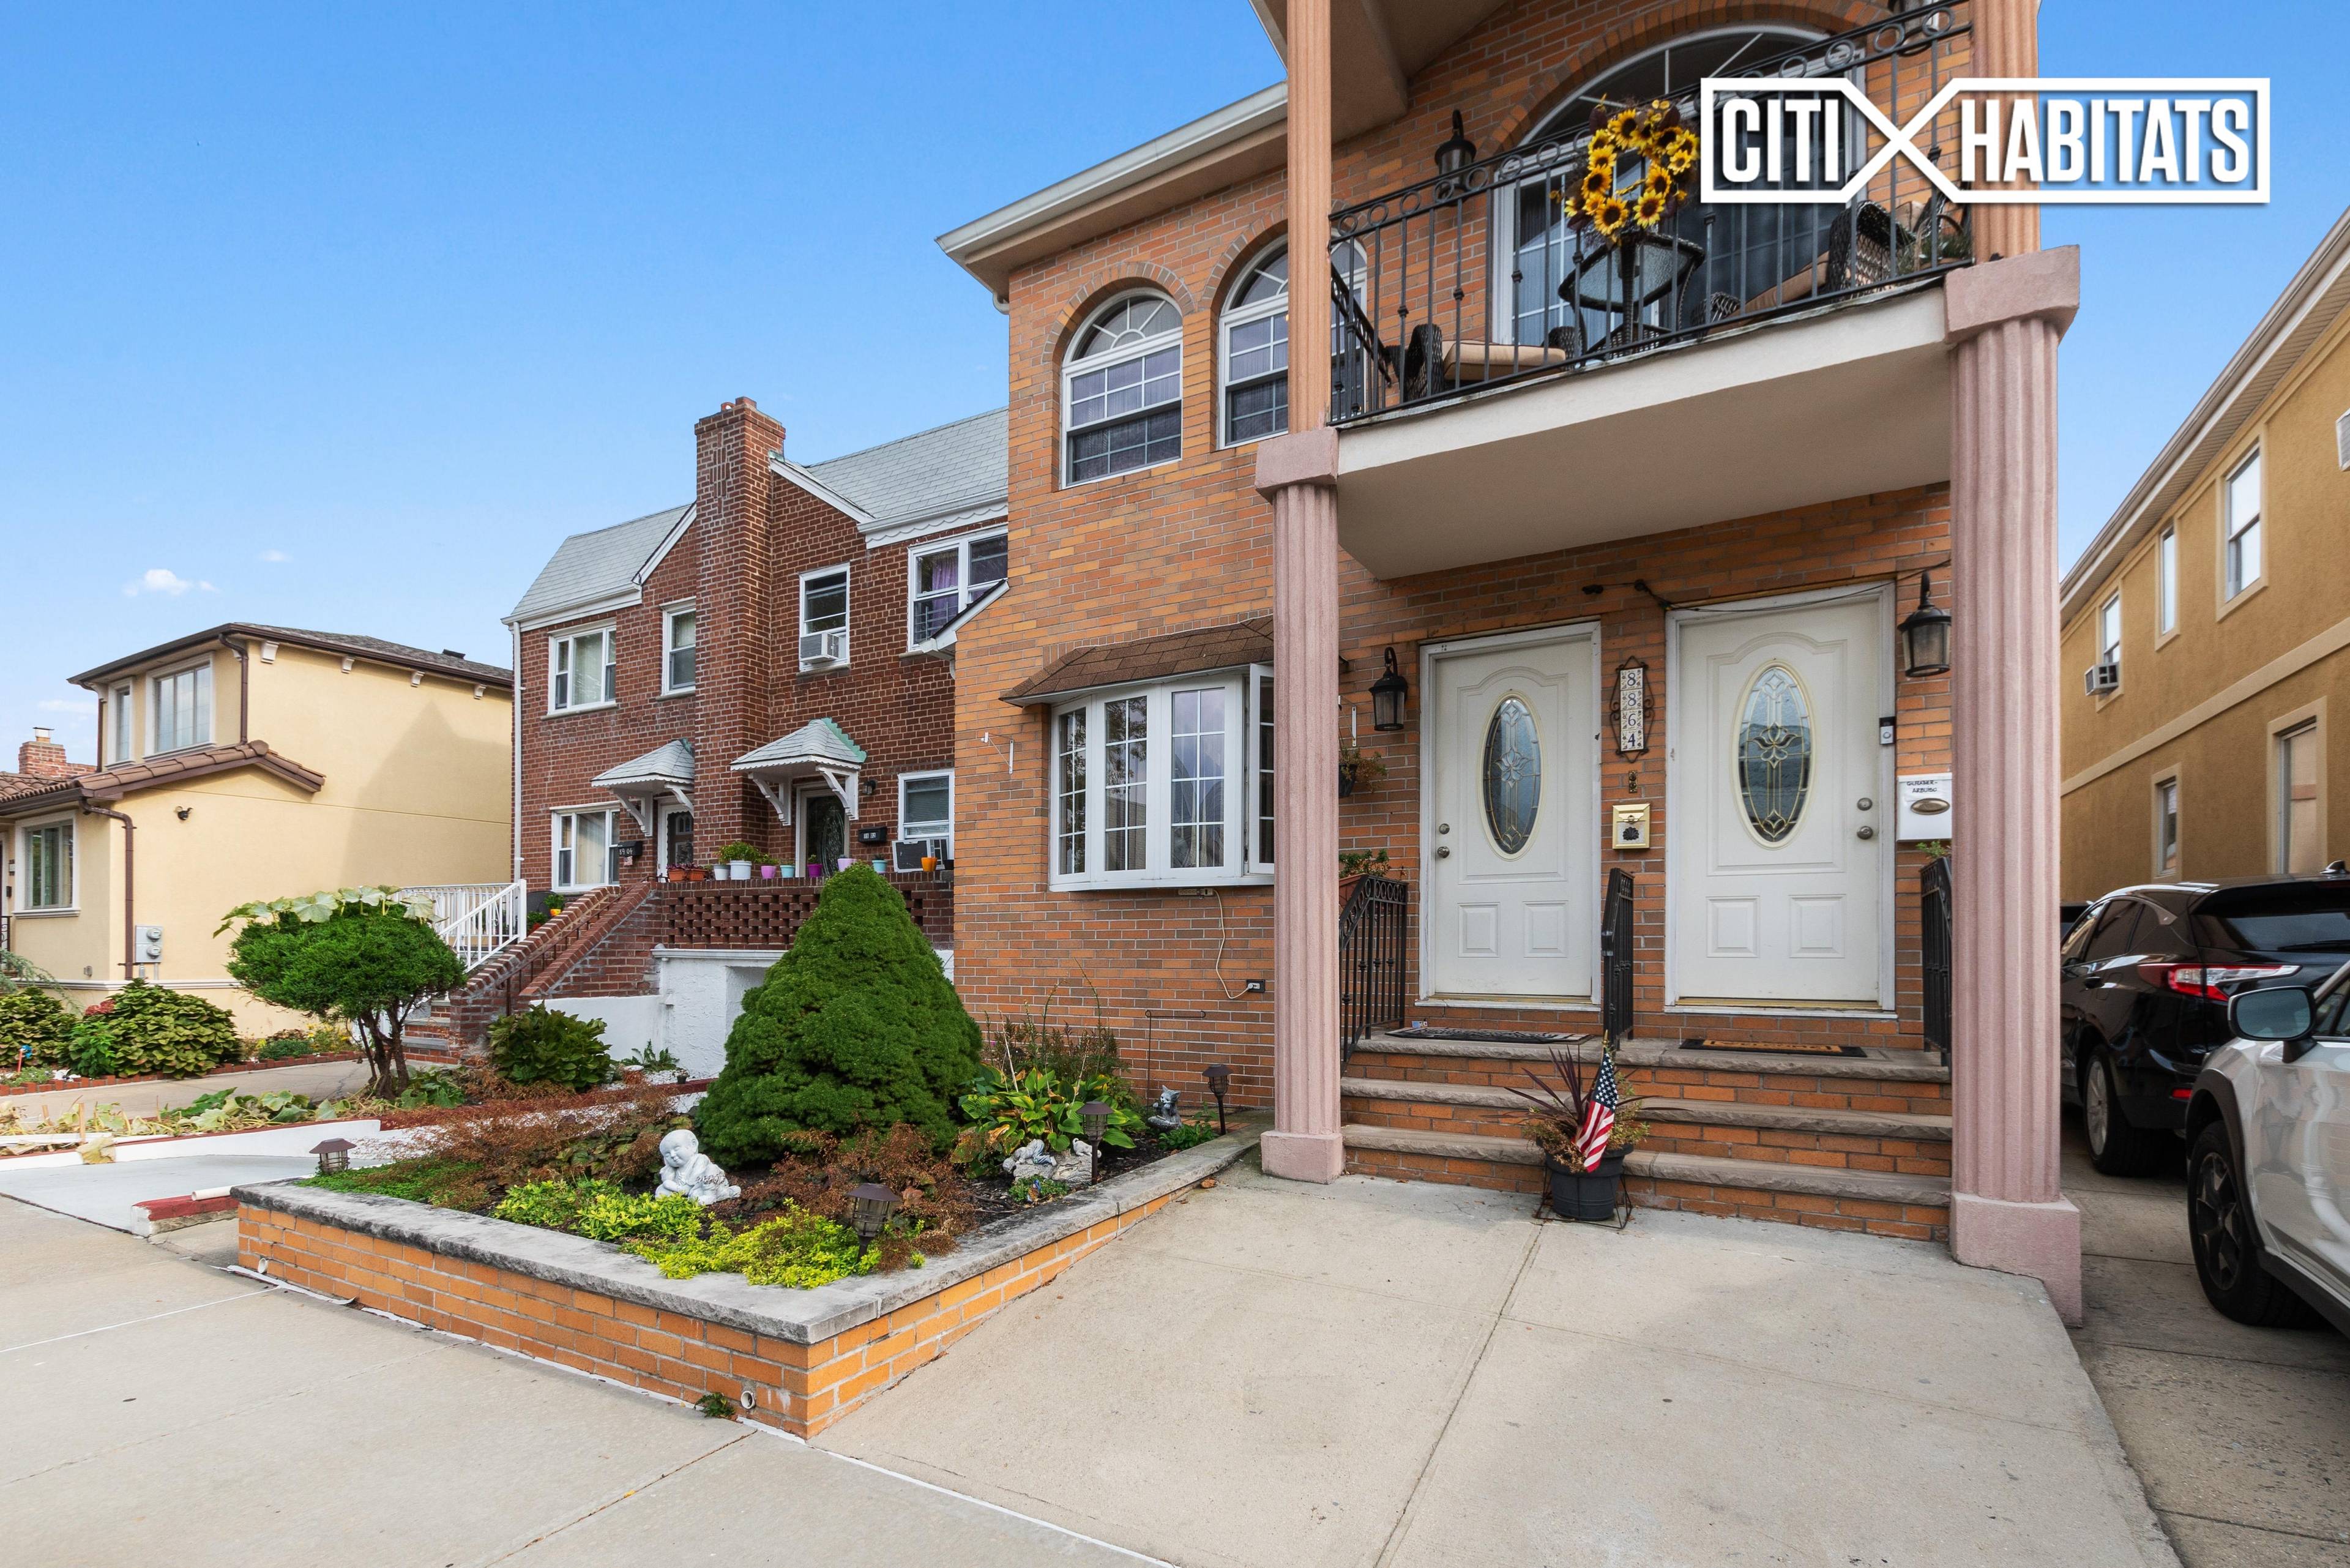 Placed in the epicenter of Forest Hills and Middle Village, this detached brick and stucco two family 6 Bedroom 4 Bath home in Glendale, Queens is sporting an impeccable new ...